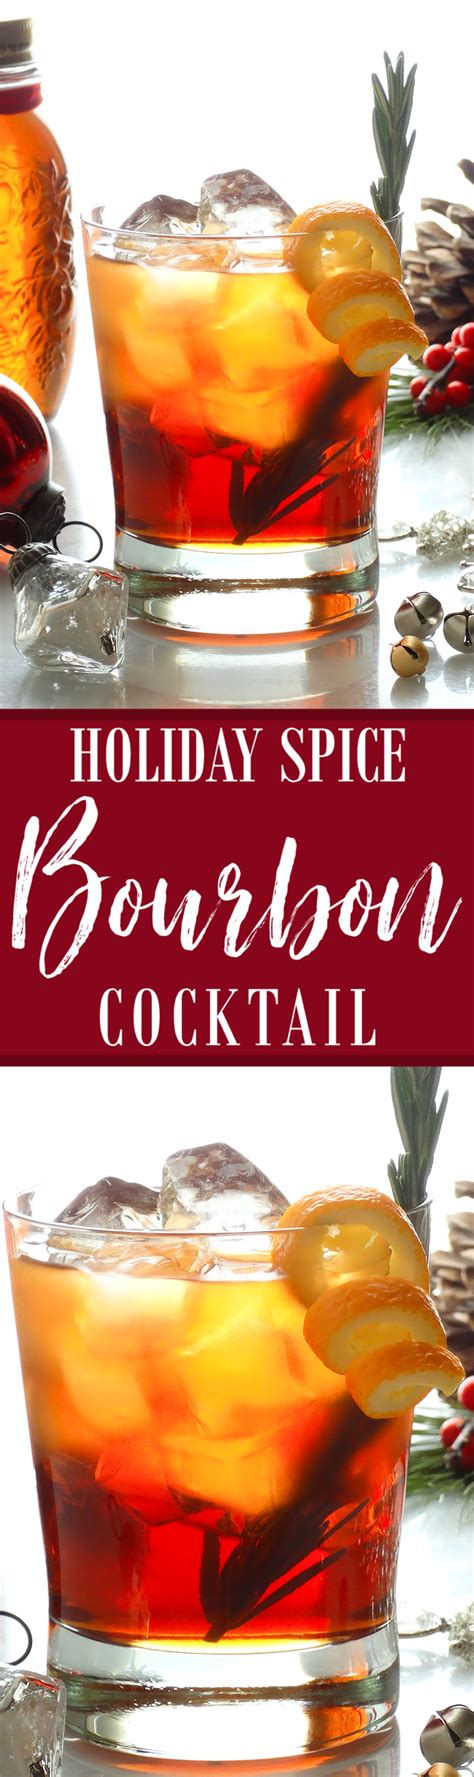 25 christmas cocktail recipes to get your holiday celebrations started. Holiday Spice Bourbon Cocktail ~ The perfect wintertime ...